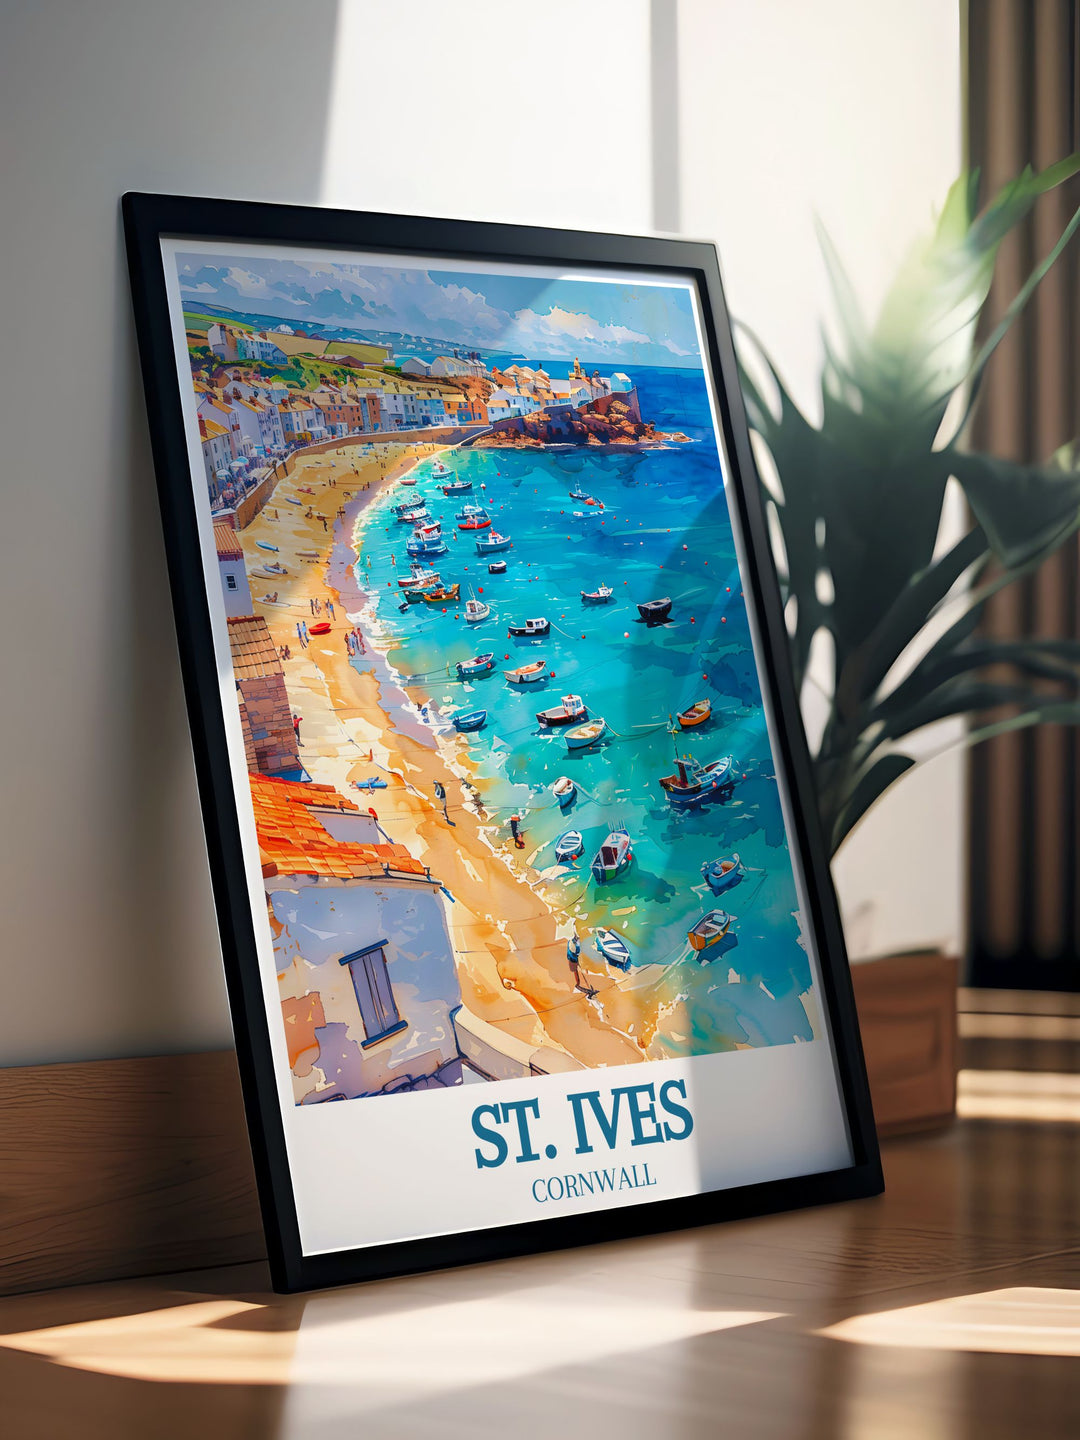 The historic town of St. Ives and the picturesque Porthmeor Beach are beautifully illustrated in this poster, celebrating the charm and beauty of Cornwall.